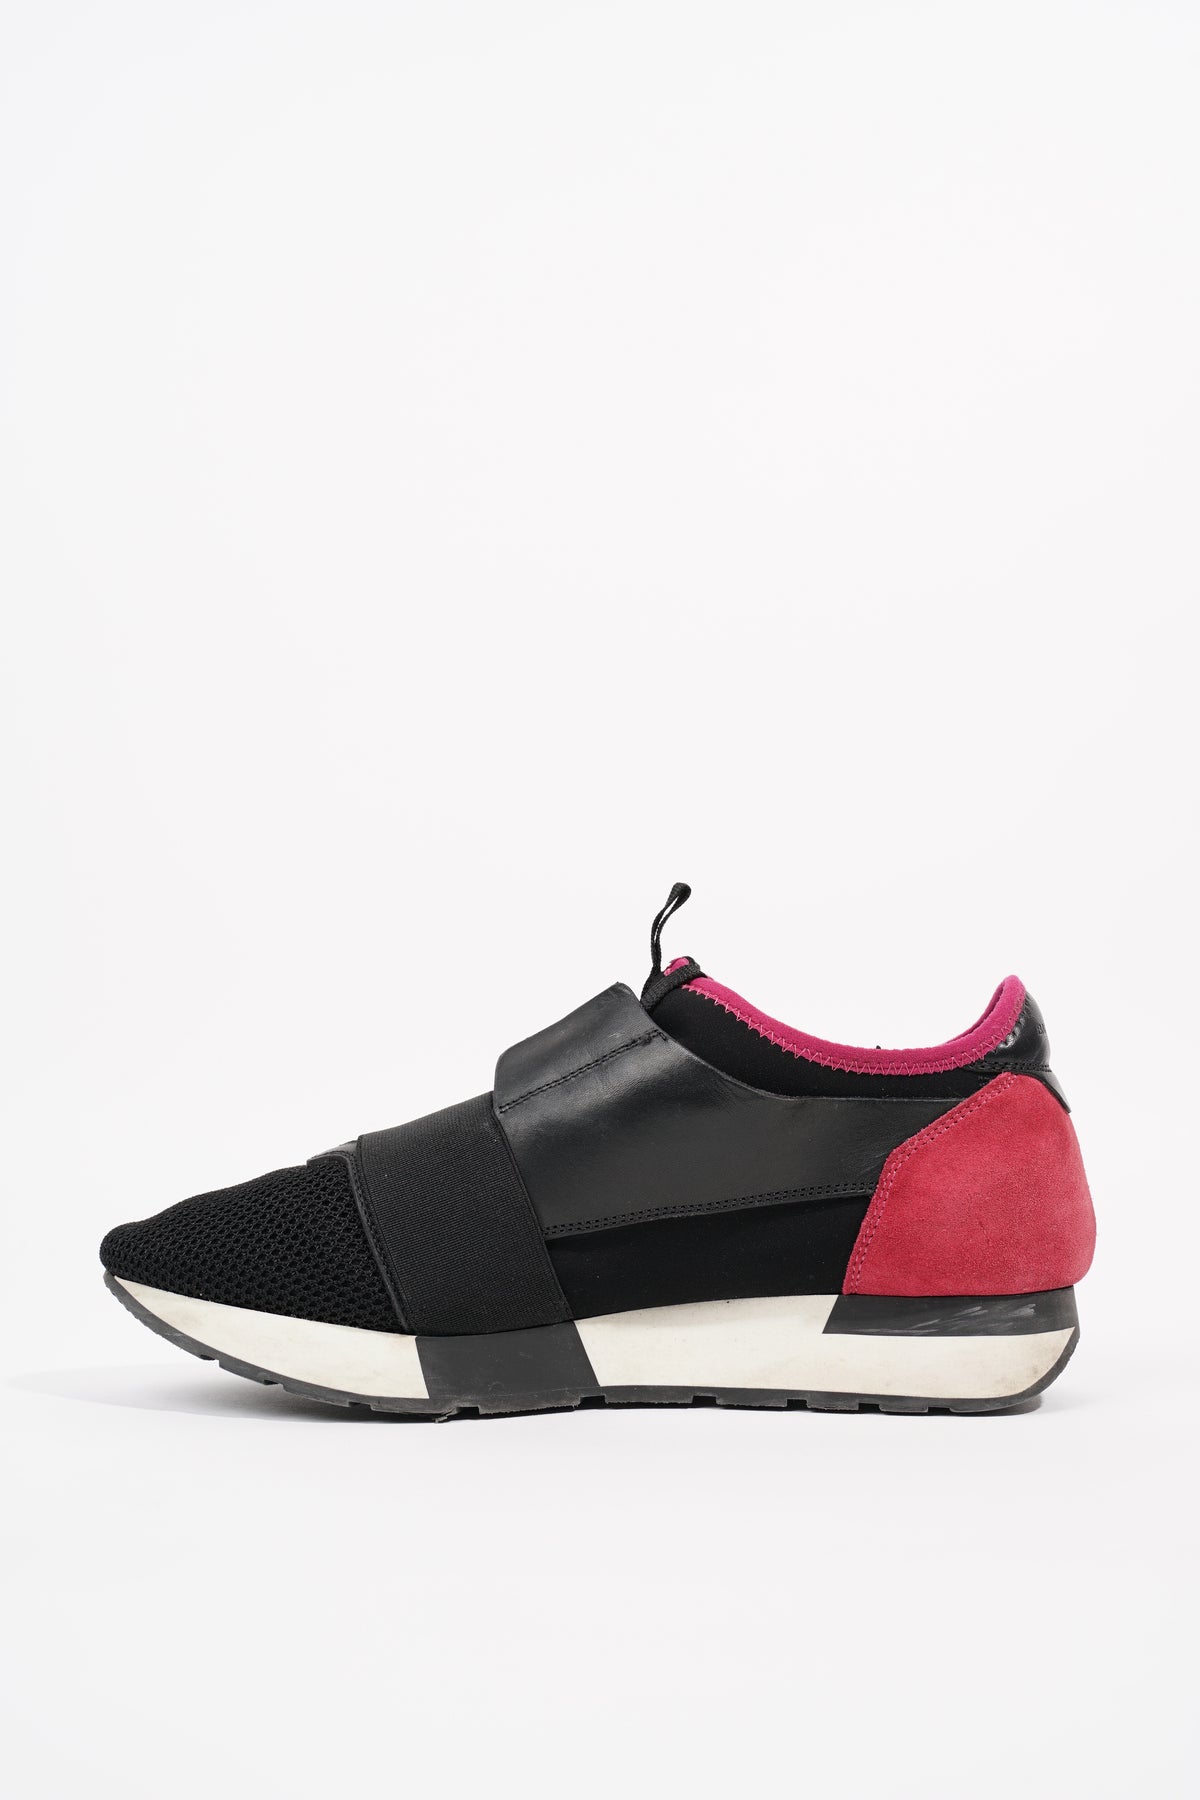 Balenciaga  Race Runner Leather Suede And Neoprene Sneakers  Gray by  Balenciaga  Snap Fashion  Shop Fashion in a Snap